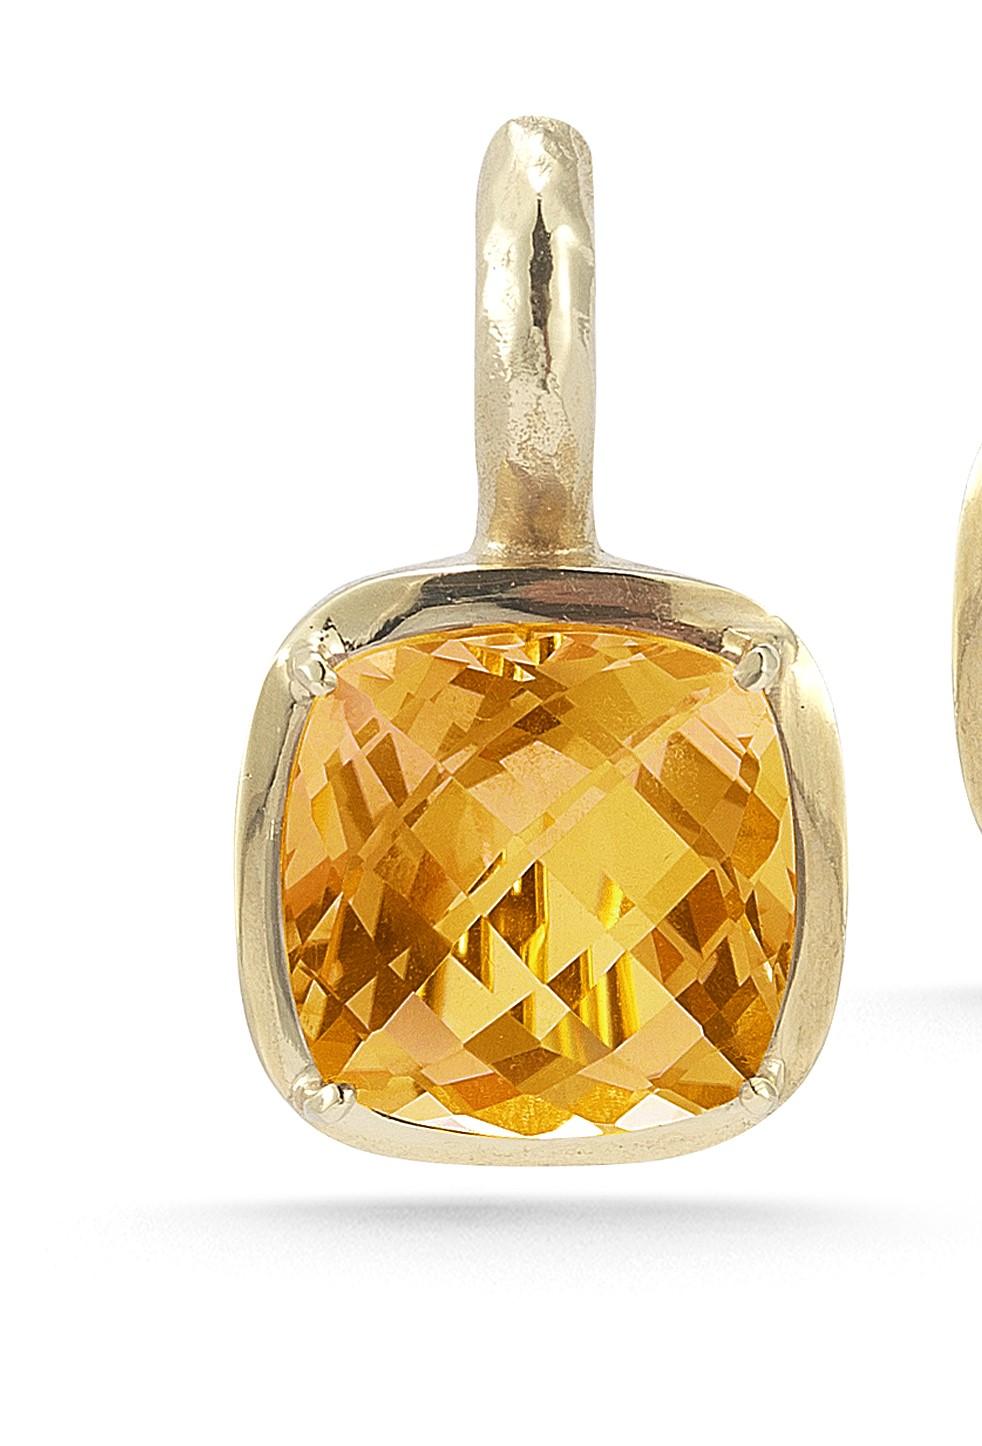 14 Karat Yellow Gold Matte and Hammer-Finished Drop Earrings, Centered with a 10mm 7.0CT Checkerboard Cushion-Cut Citrine Semi-Precious Color Stone.
